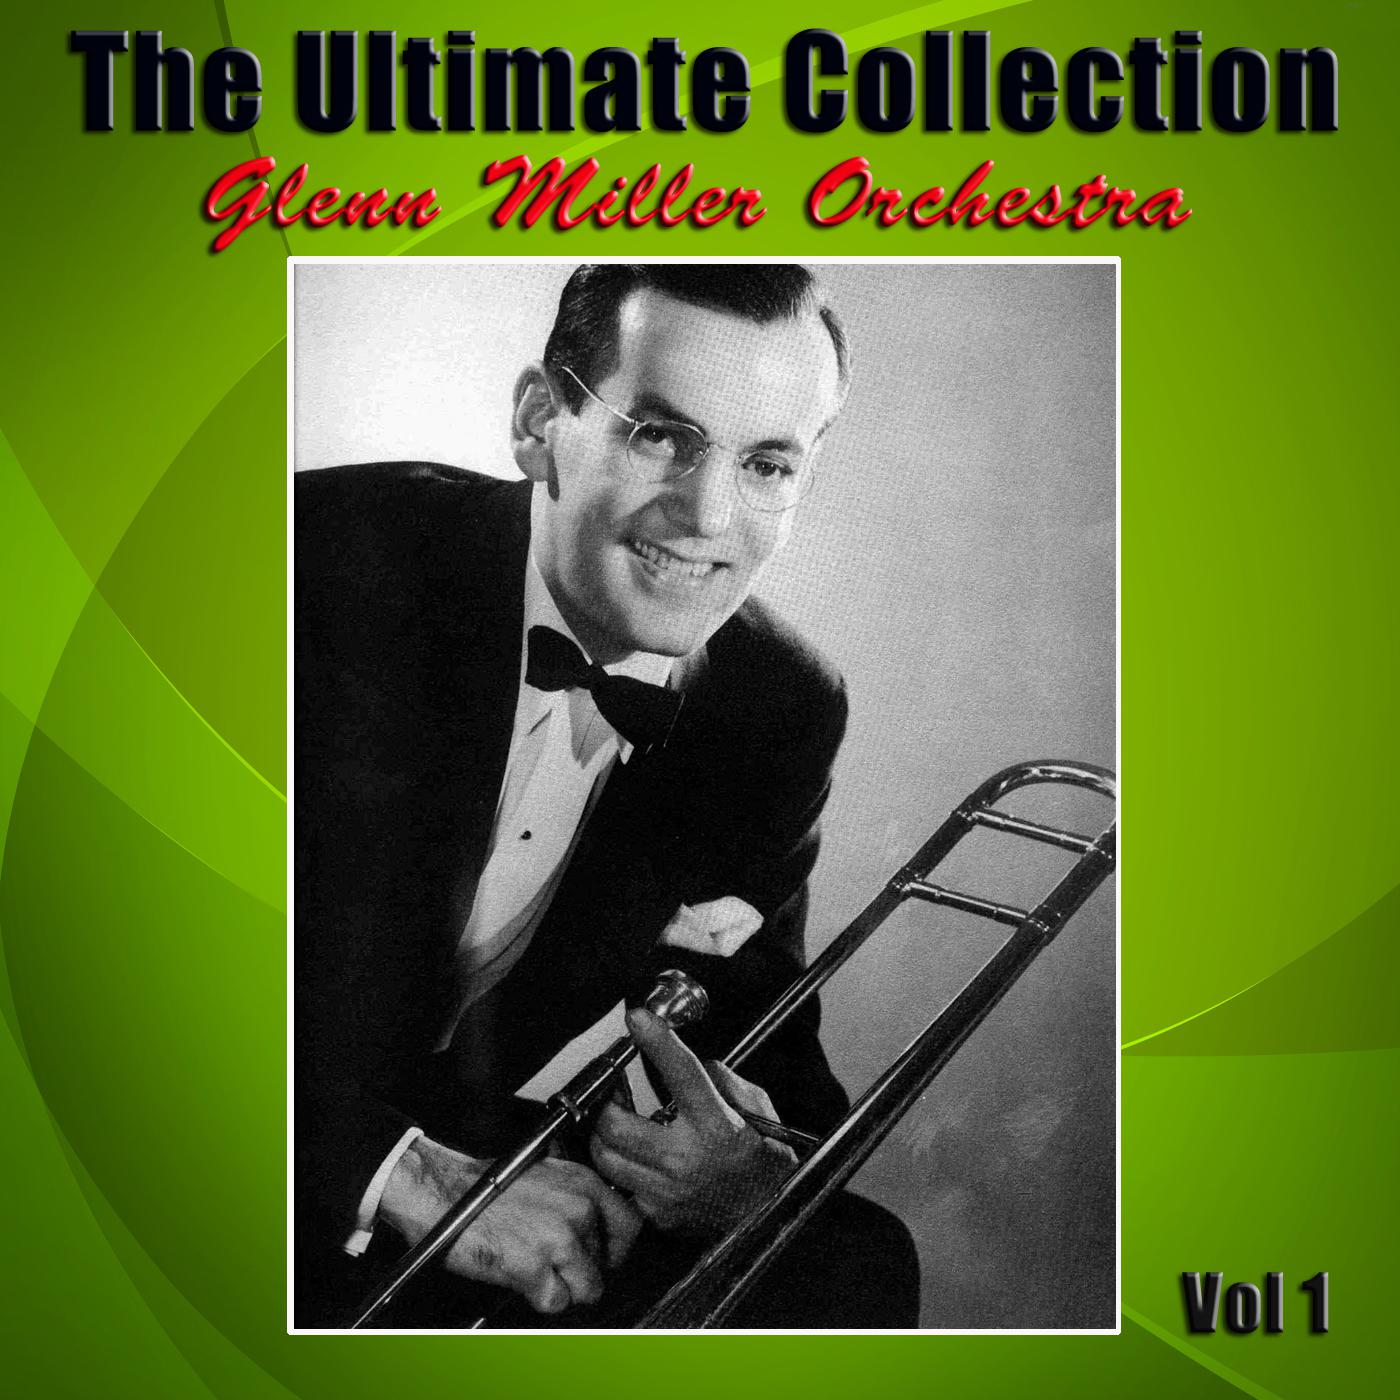 The Ultimate Collection Vol 1